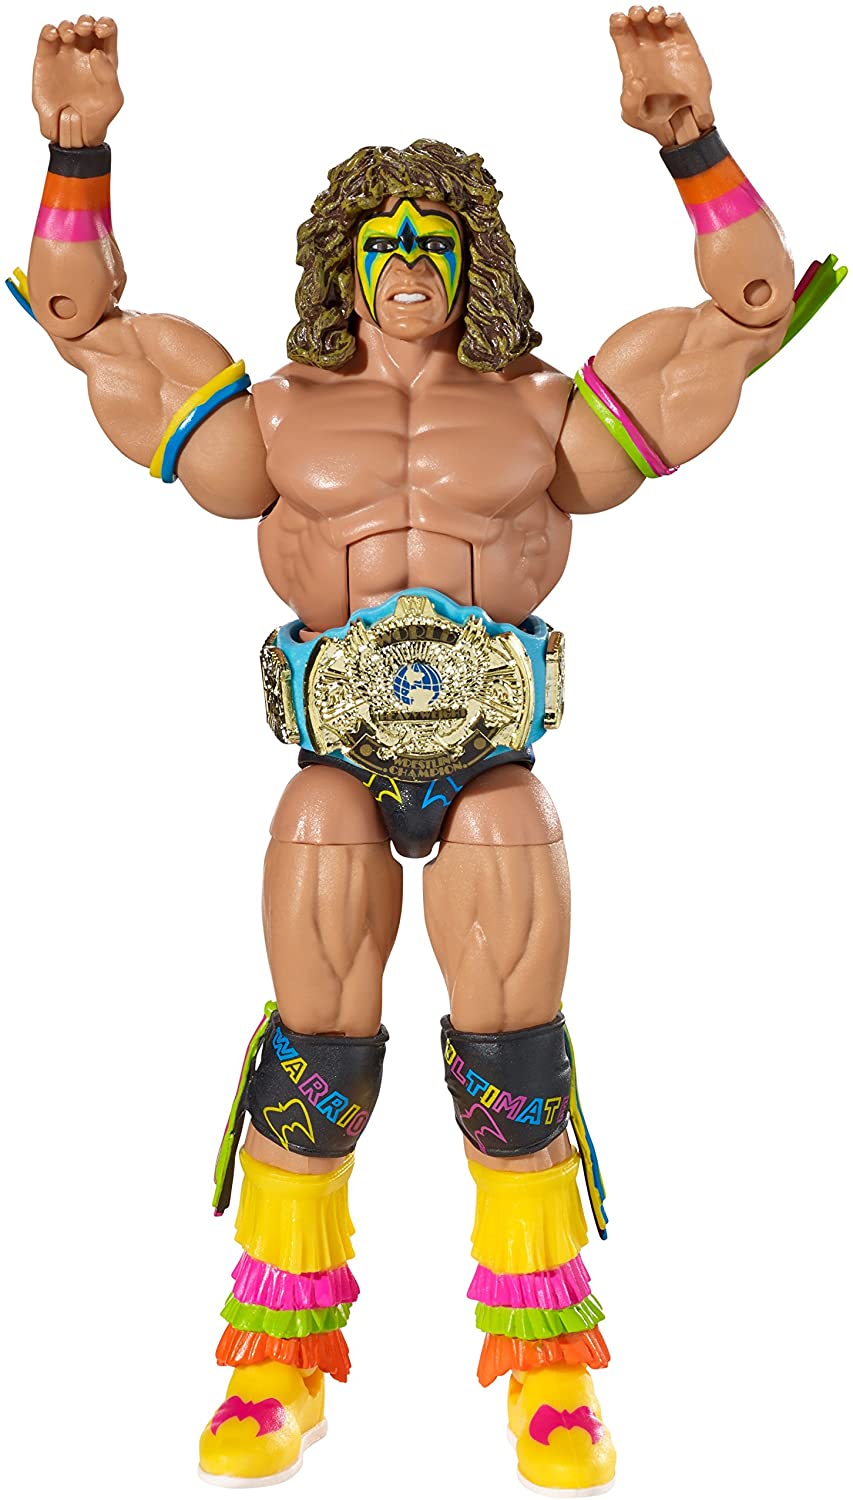 WWE Mattel Hall of Fame 1 Ultimate Warrior [Exclusive]